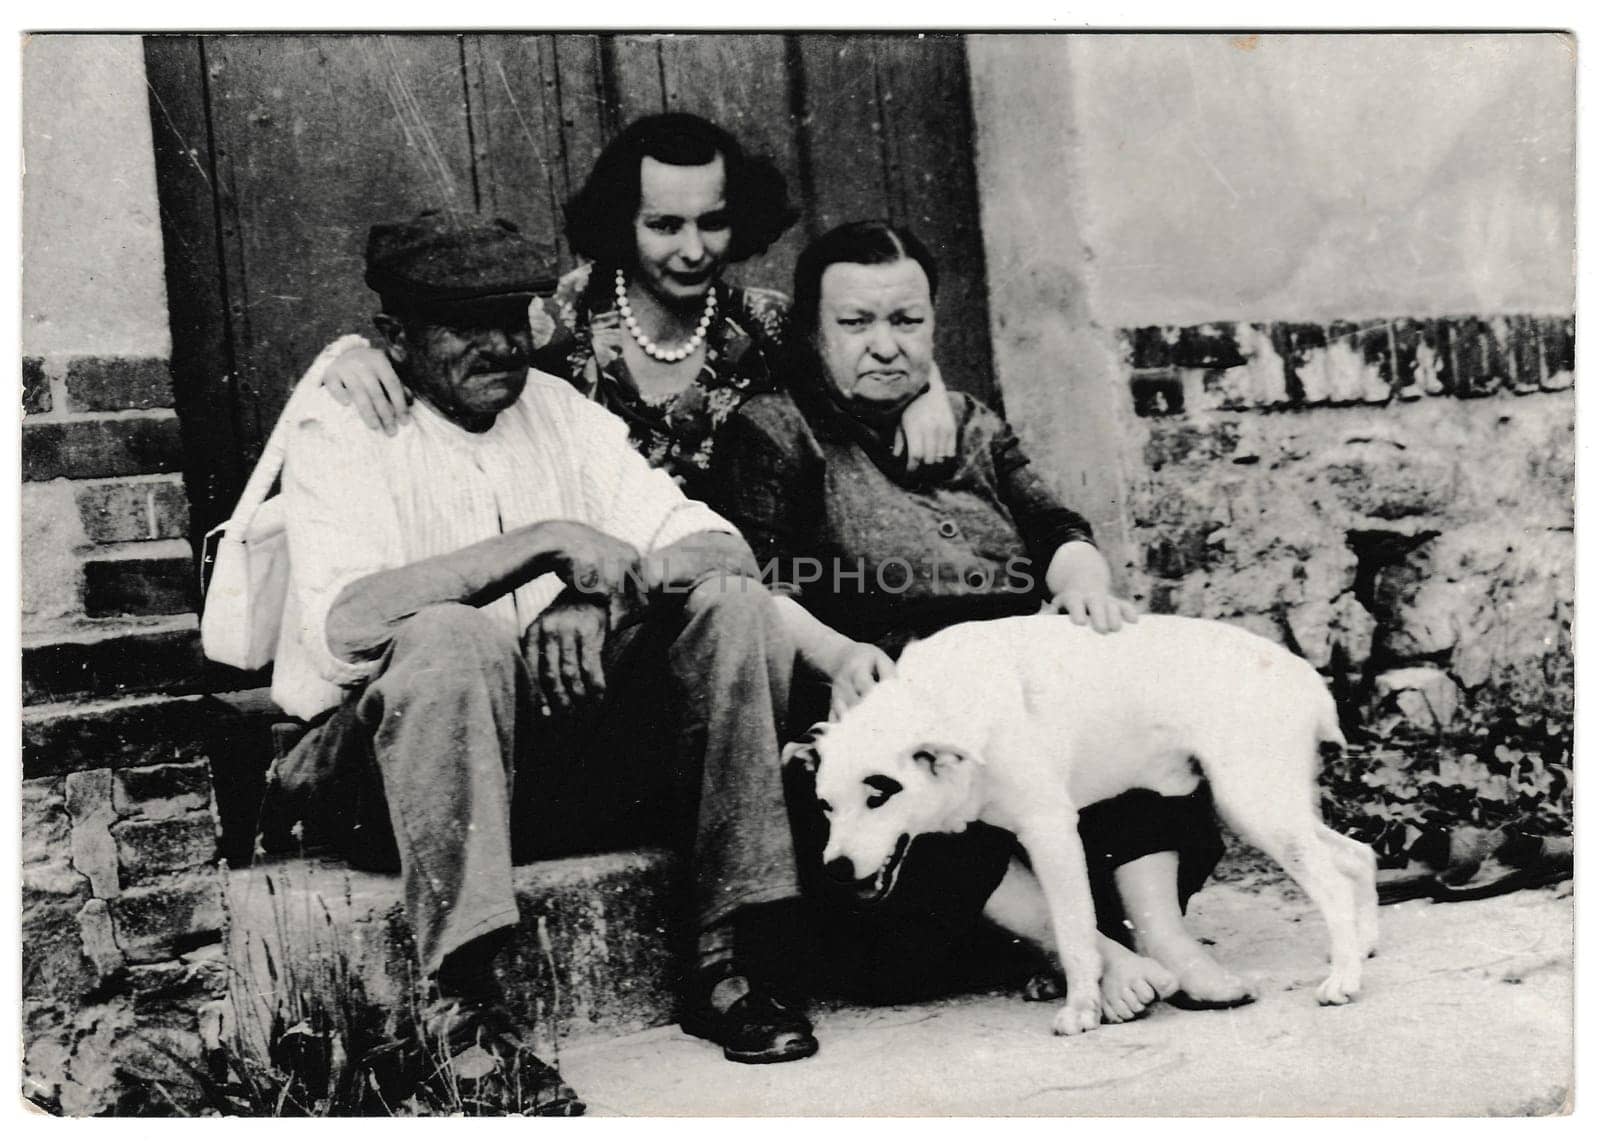 THE CZECHOSLOVAK SOCIALIST REPUBLIC - CIRCA 1960s: Retro photo shows rural people sit on a doorstep with dog. Black and white vintage photography